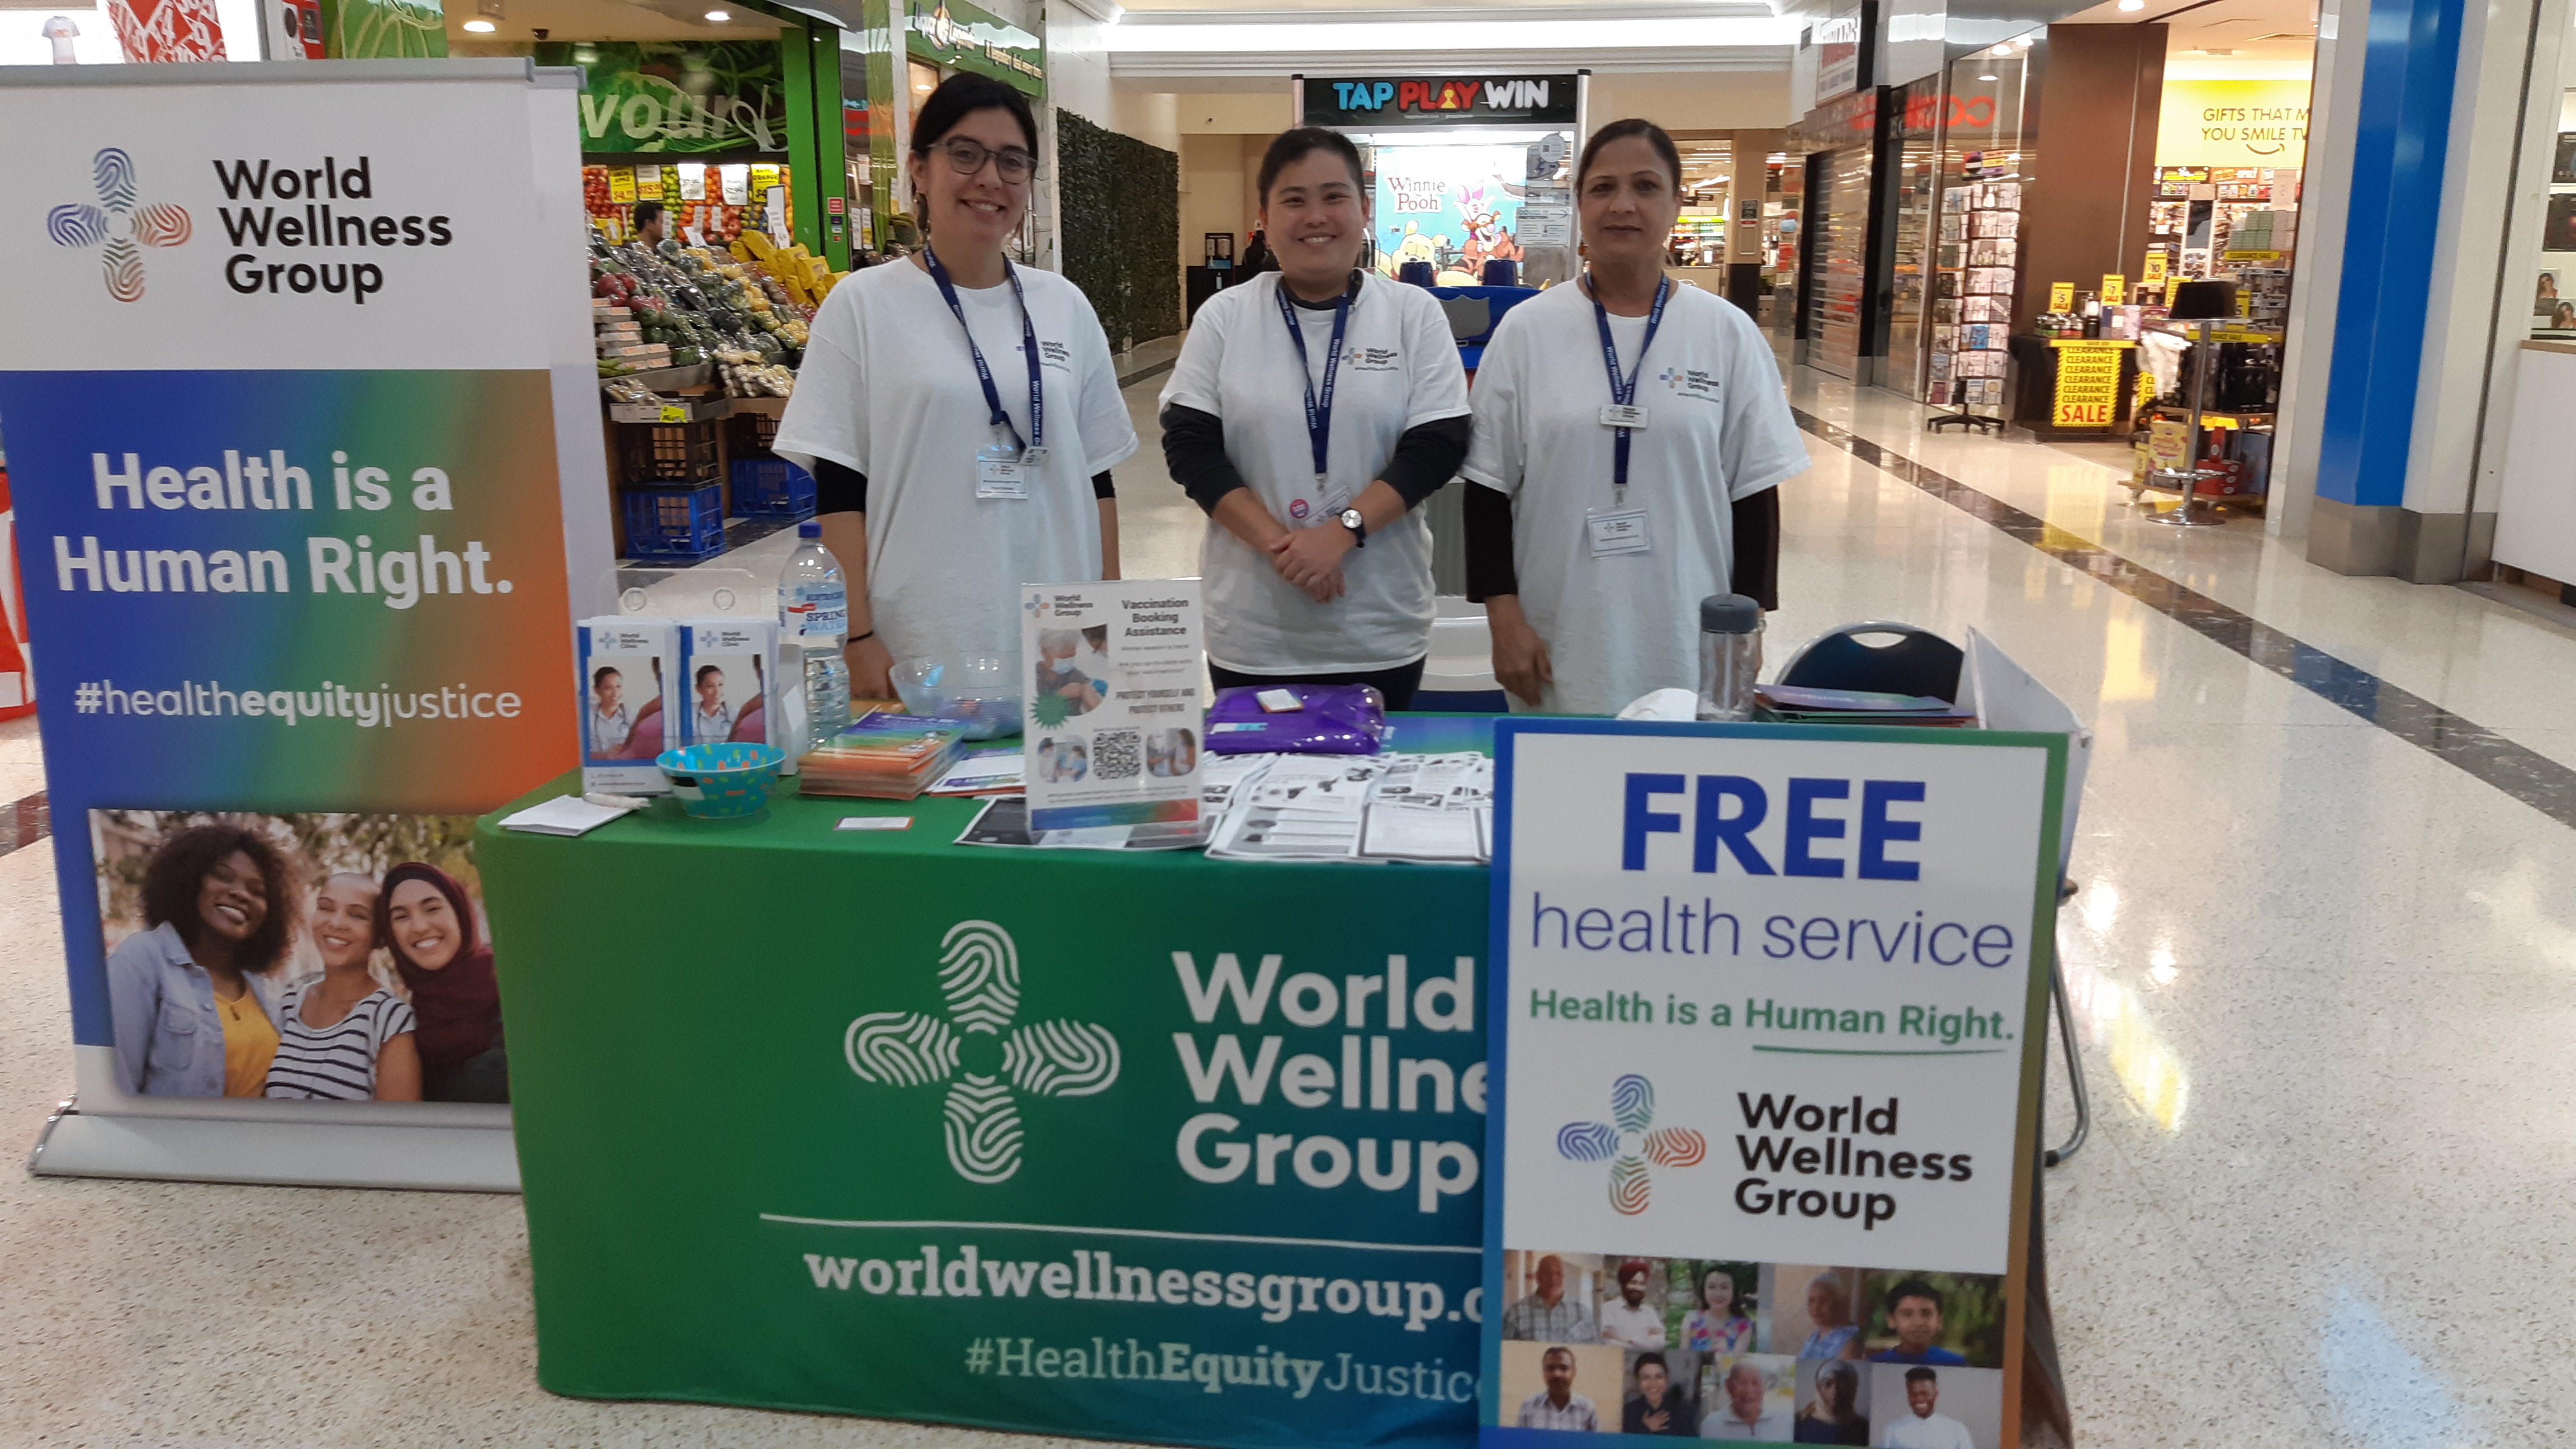 Three ladies from World Wellness Group at a pop up stall in a shopping centre